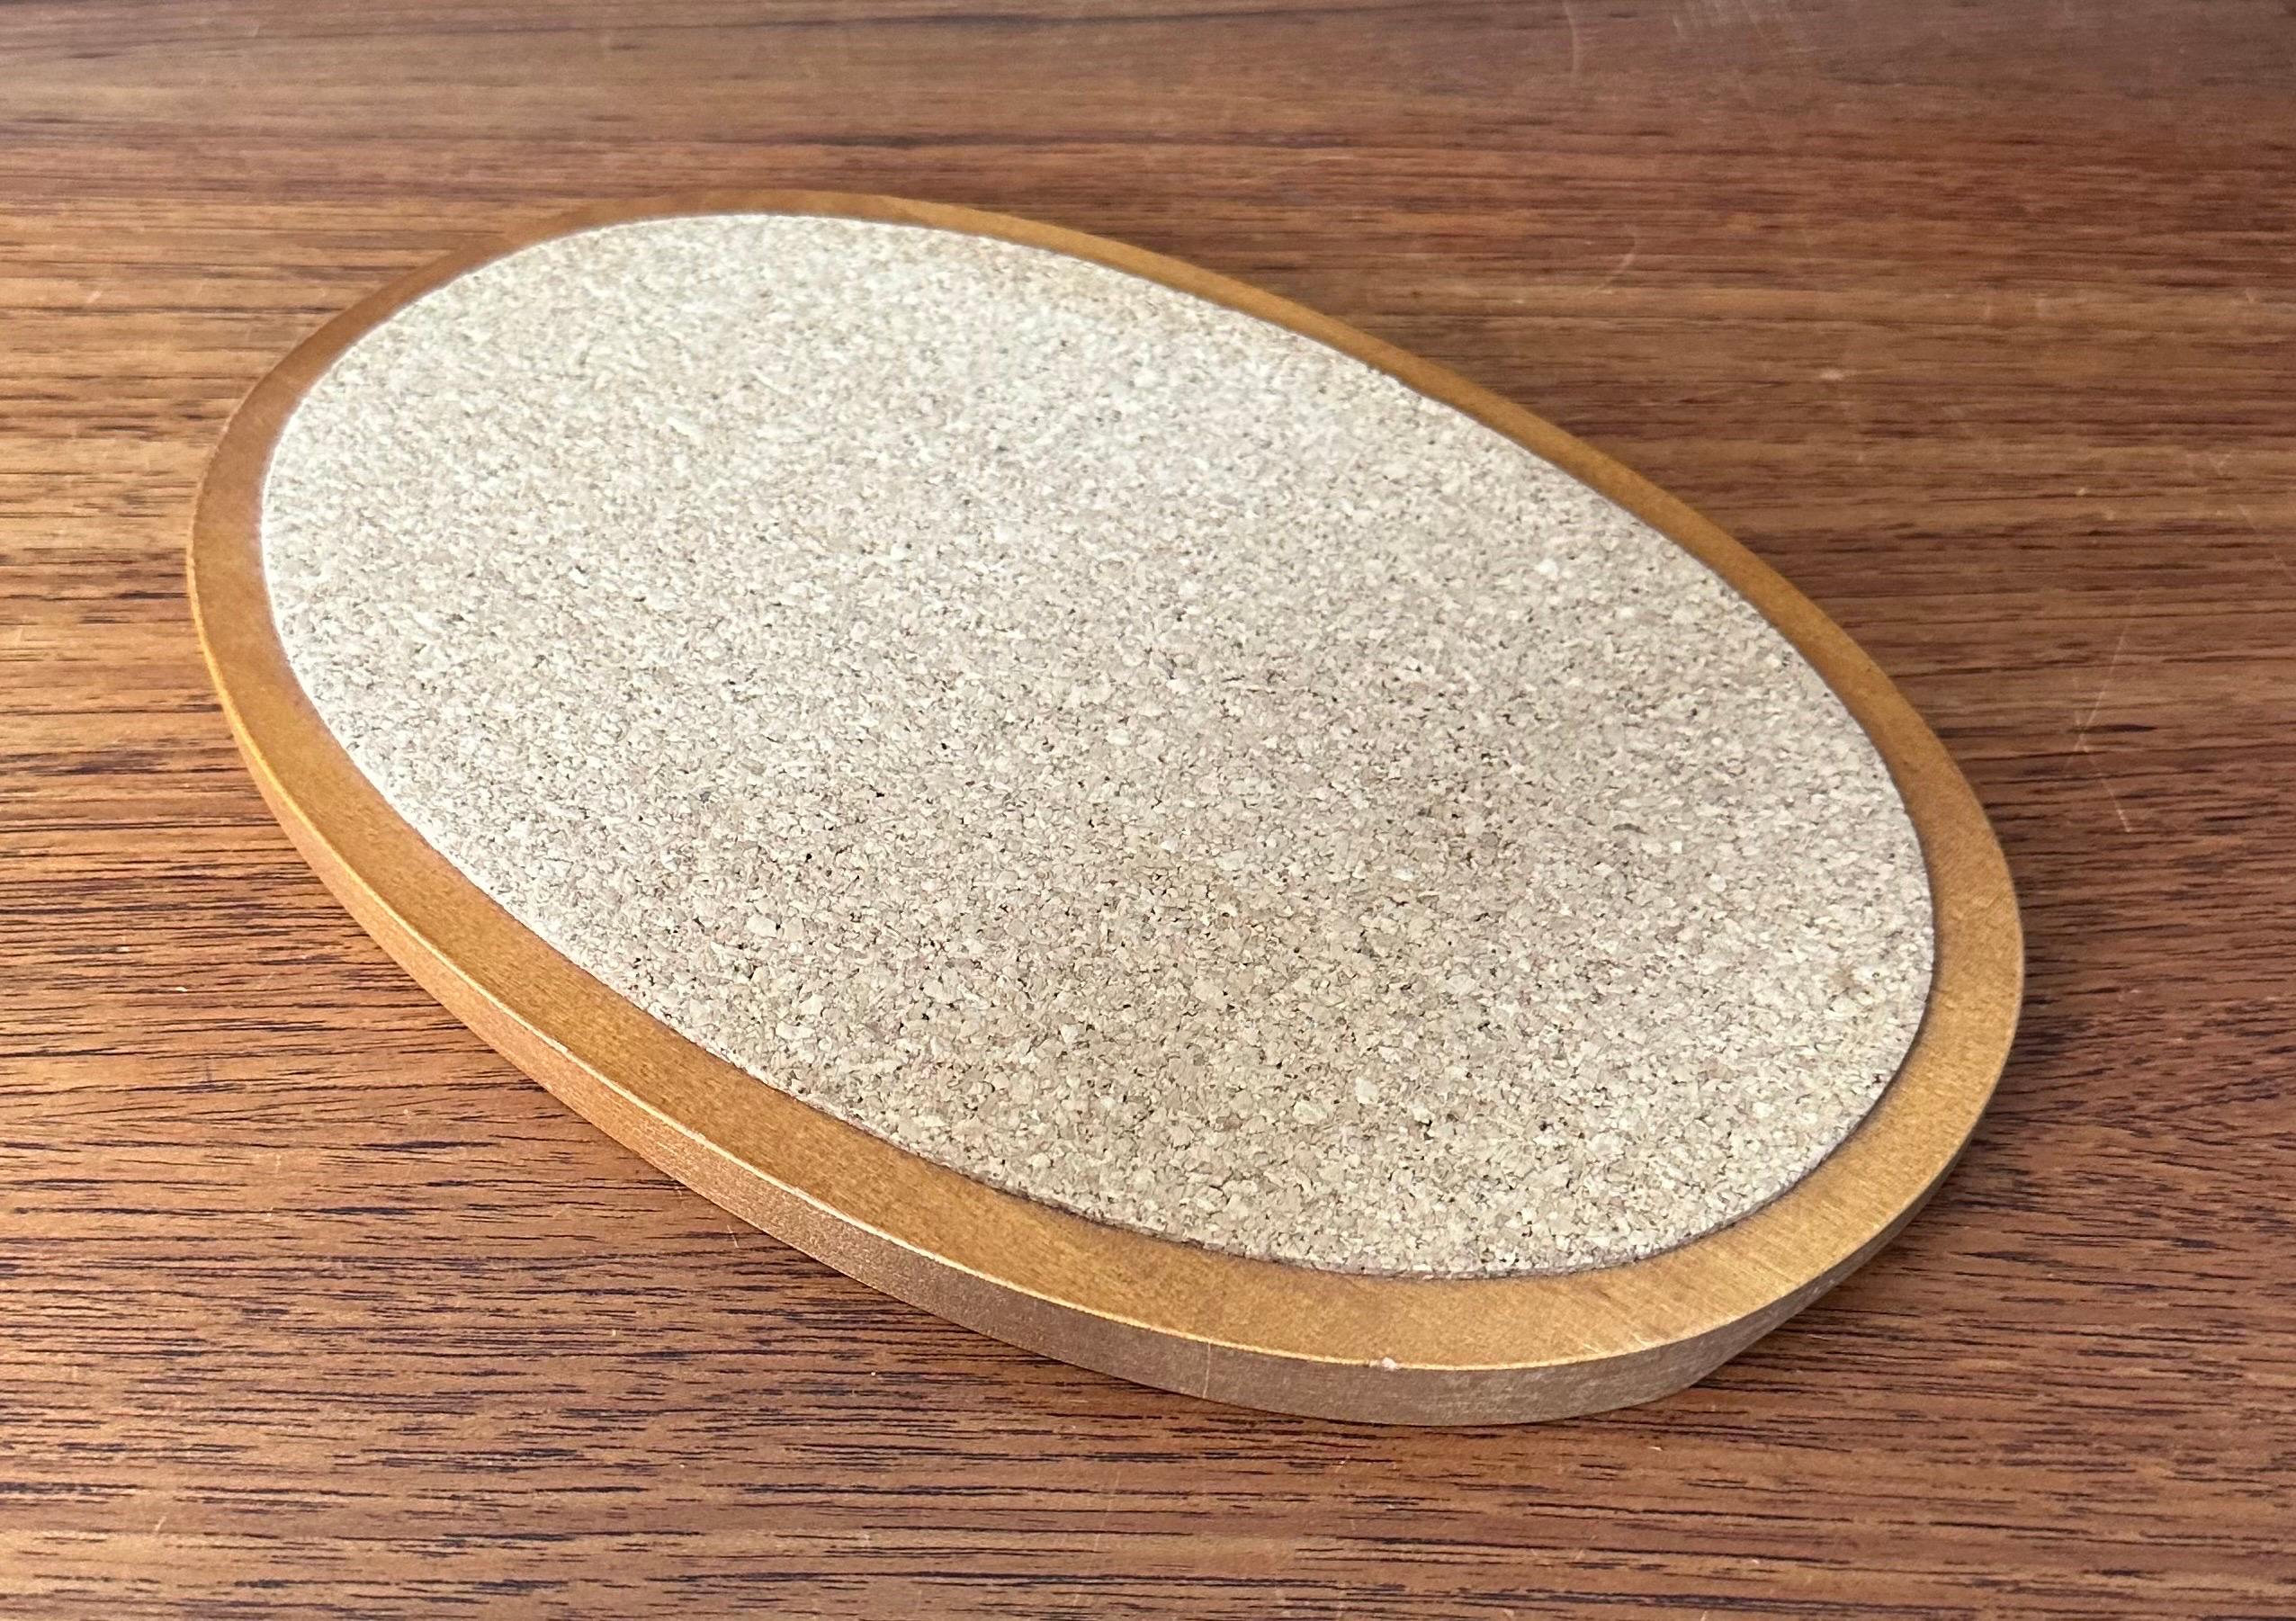 A very nice Scandinavian modern trivet with inlaid cork, circa 1970s. The trivets are in very good vintage condition and measures 10.25